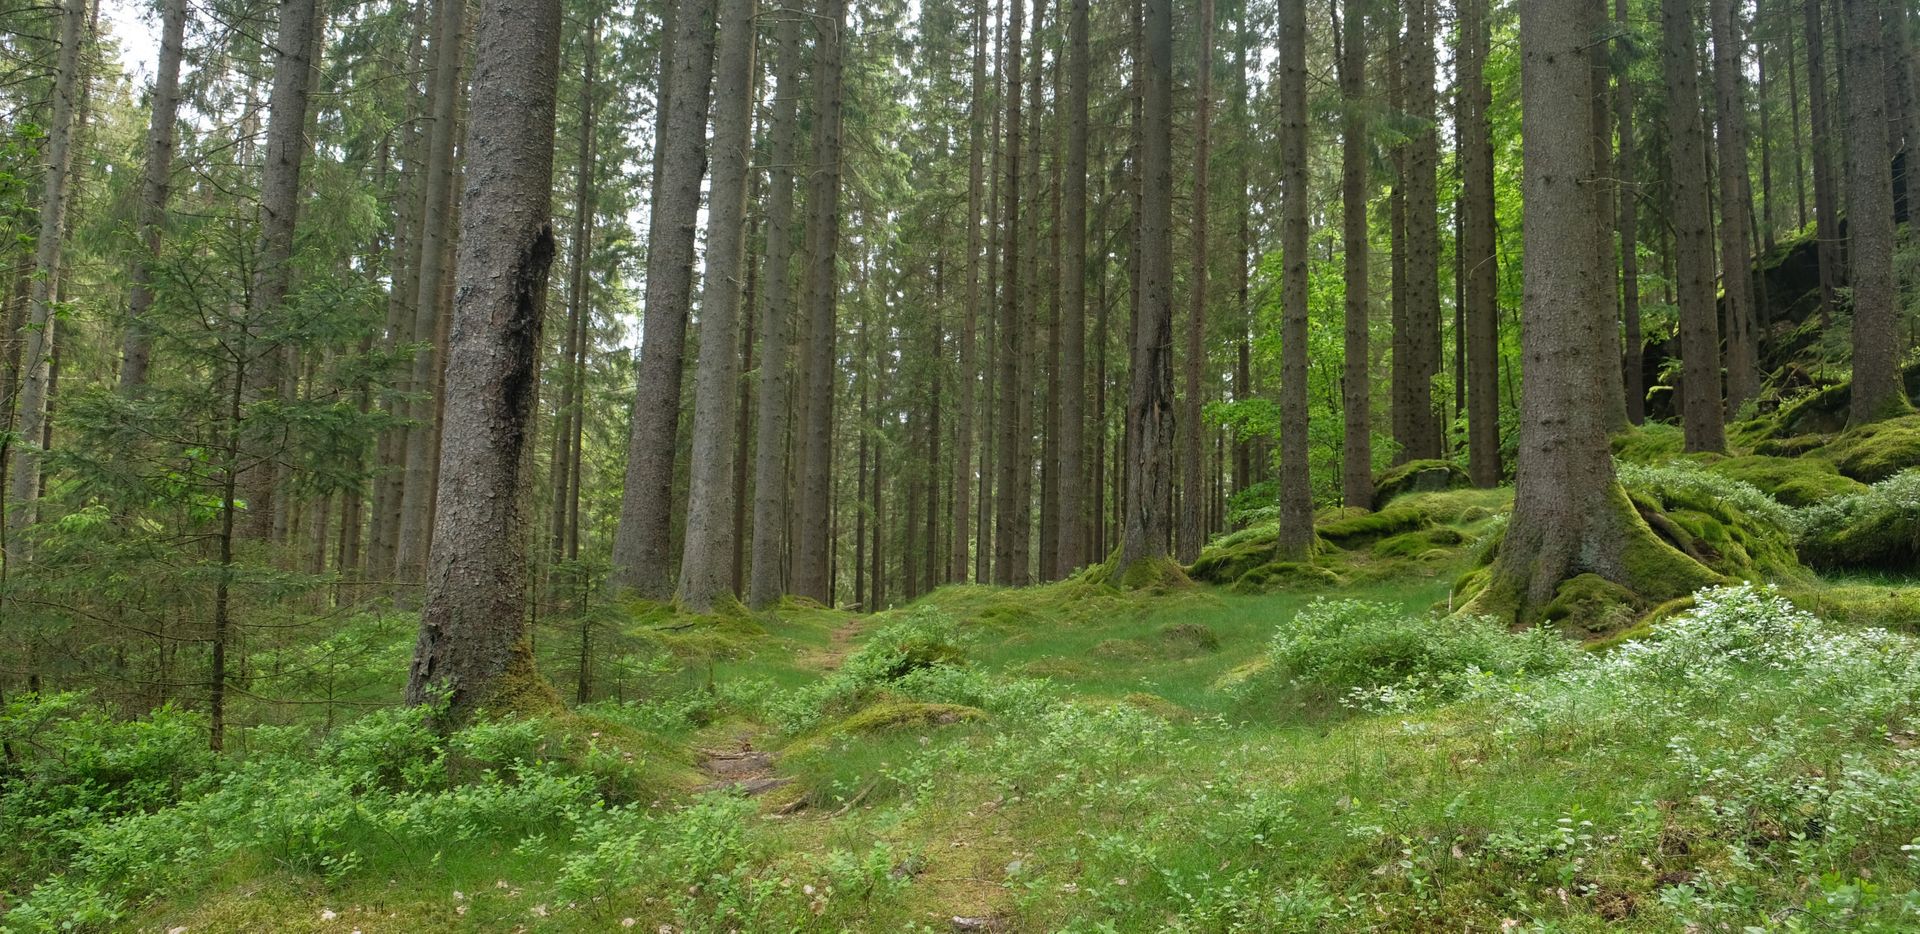 Wide shot of a forest.